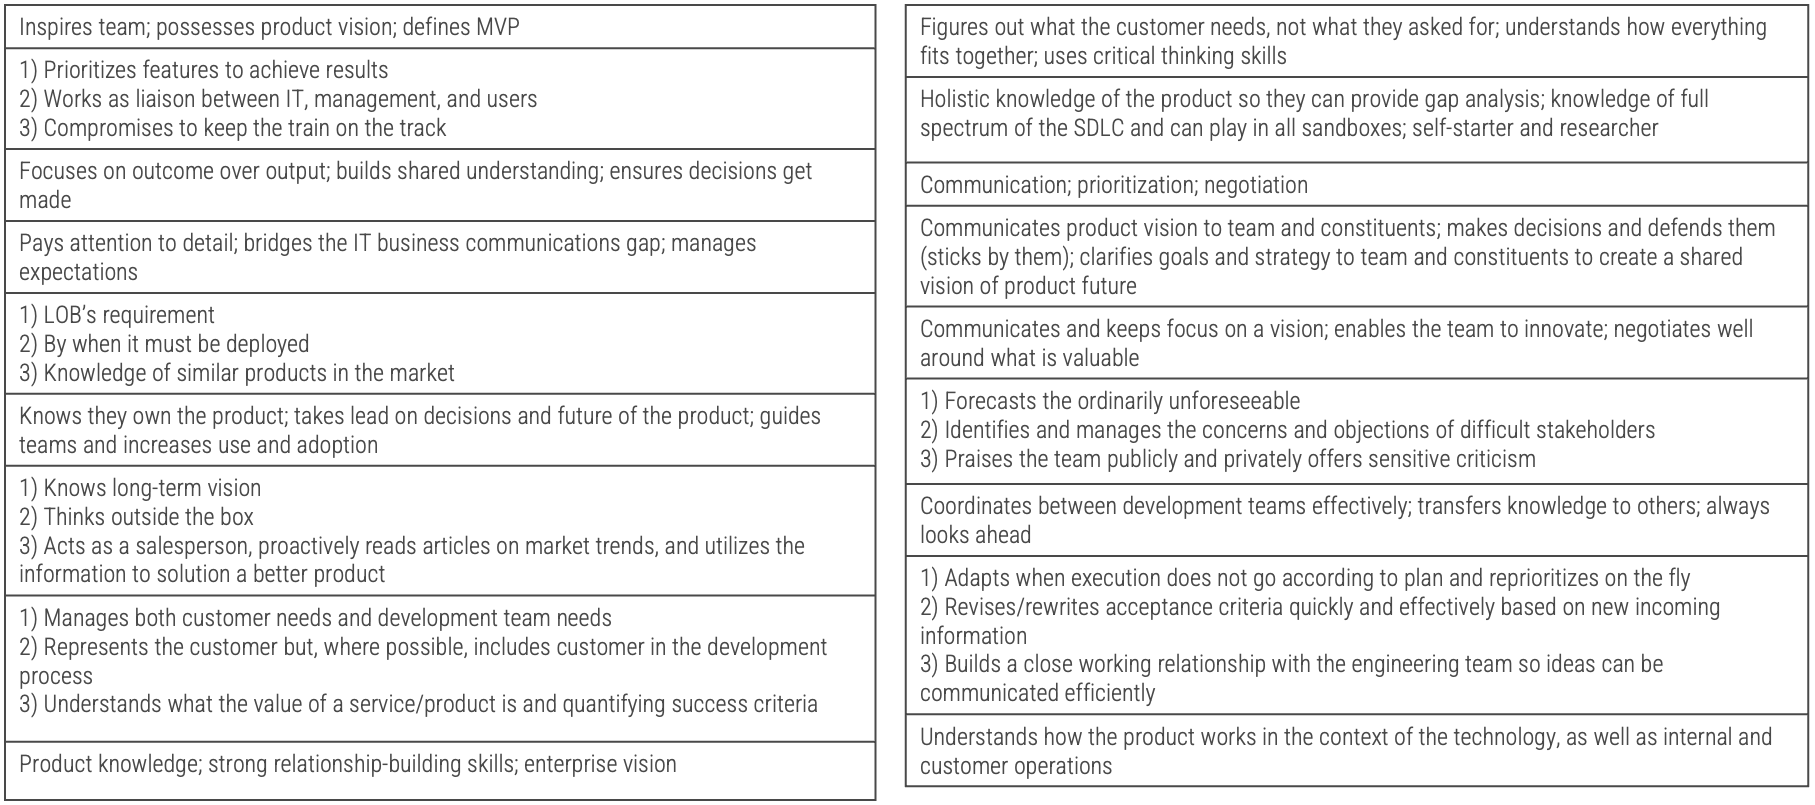 What are three things an outstanding product/service owner does that an average one doesn't? Table shows results.